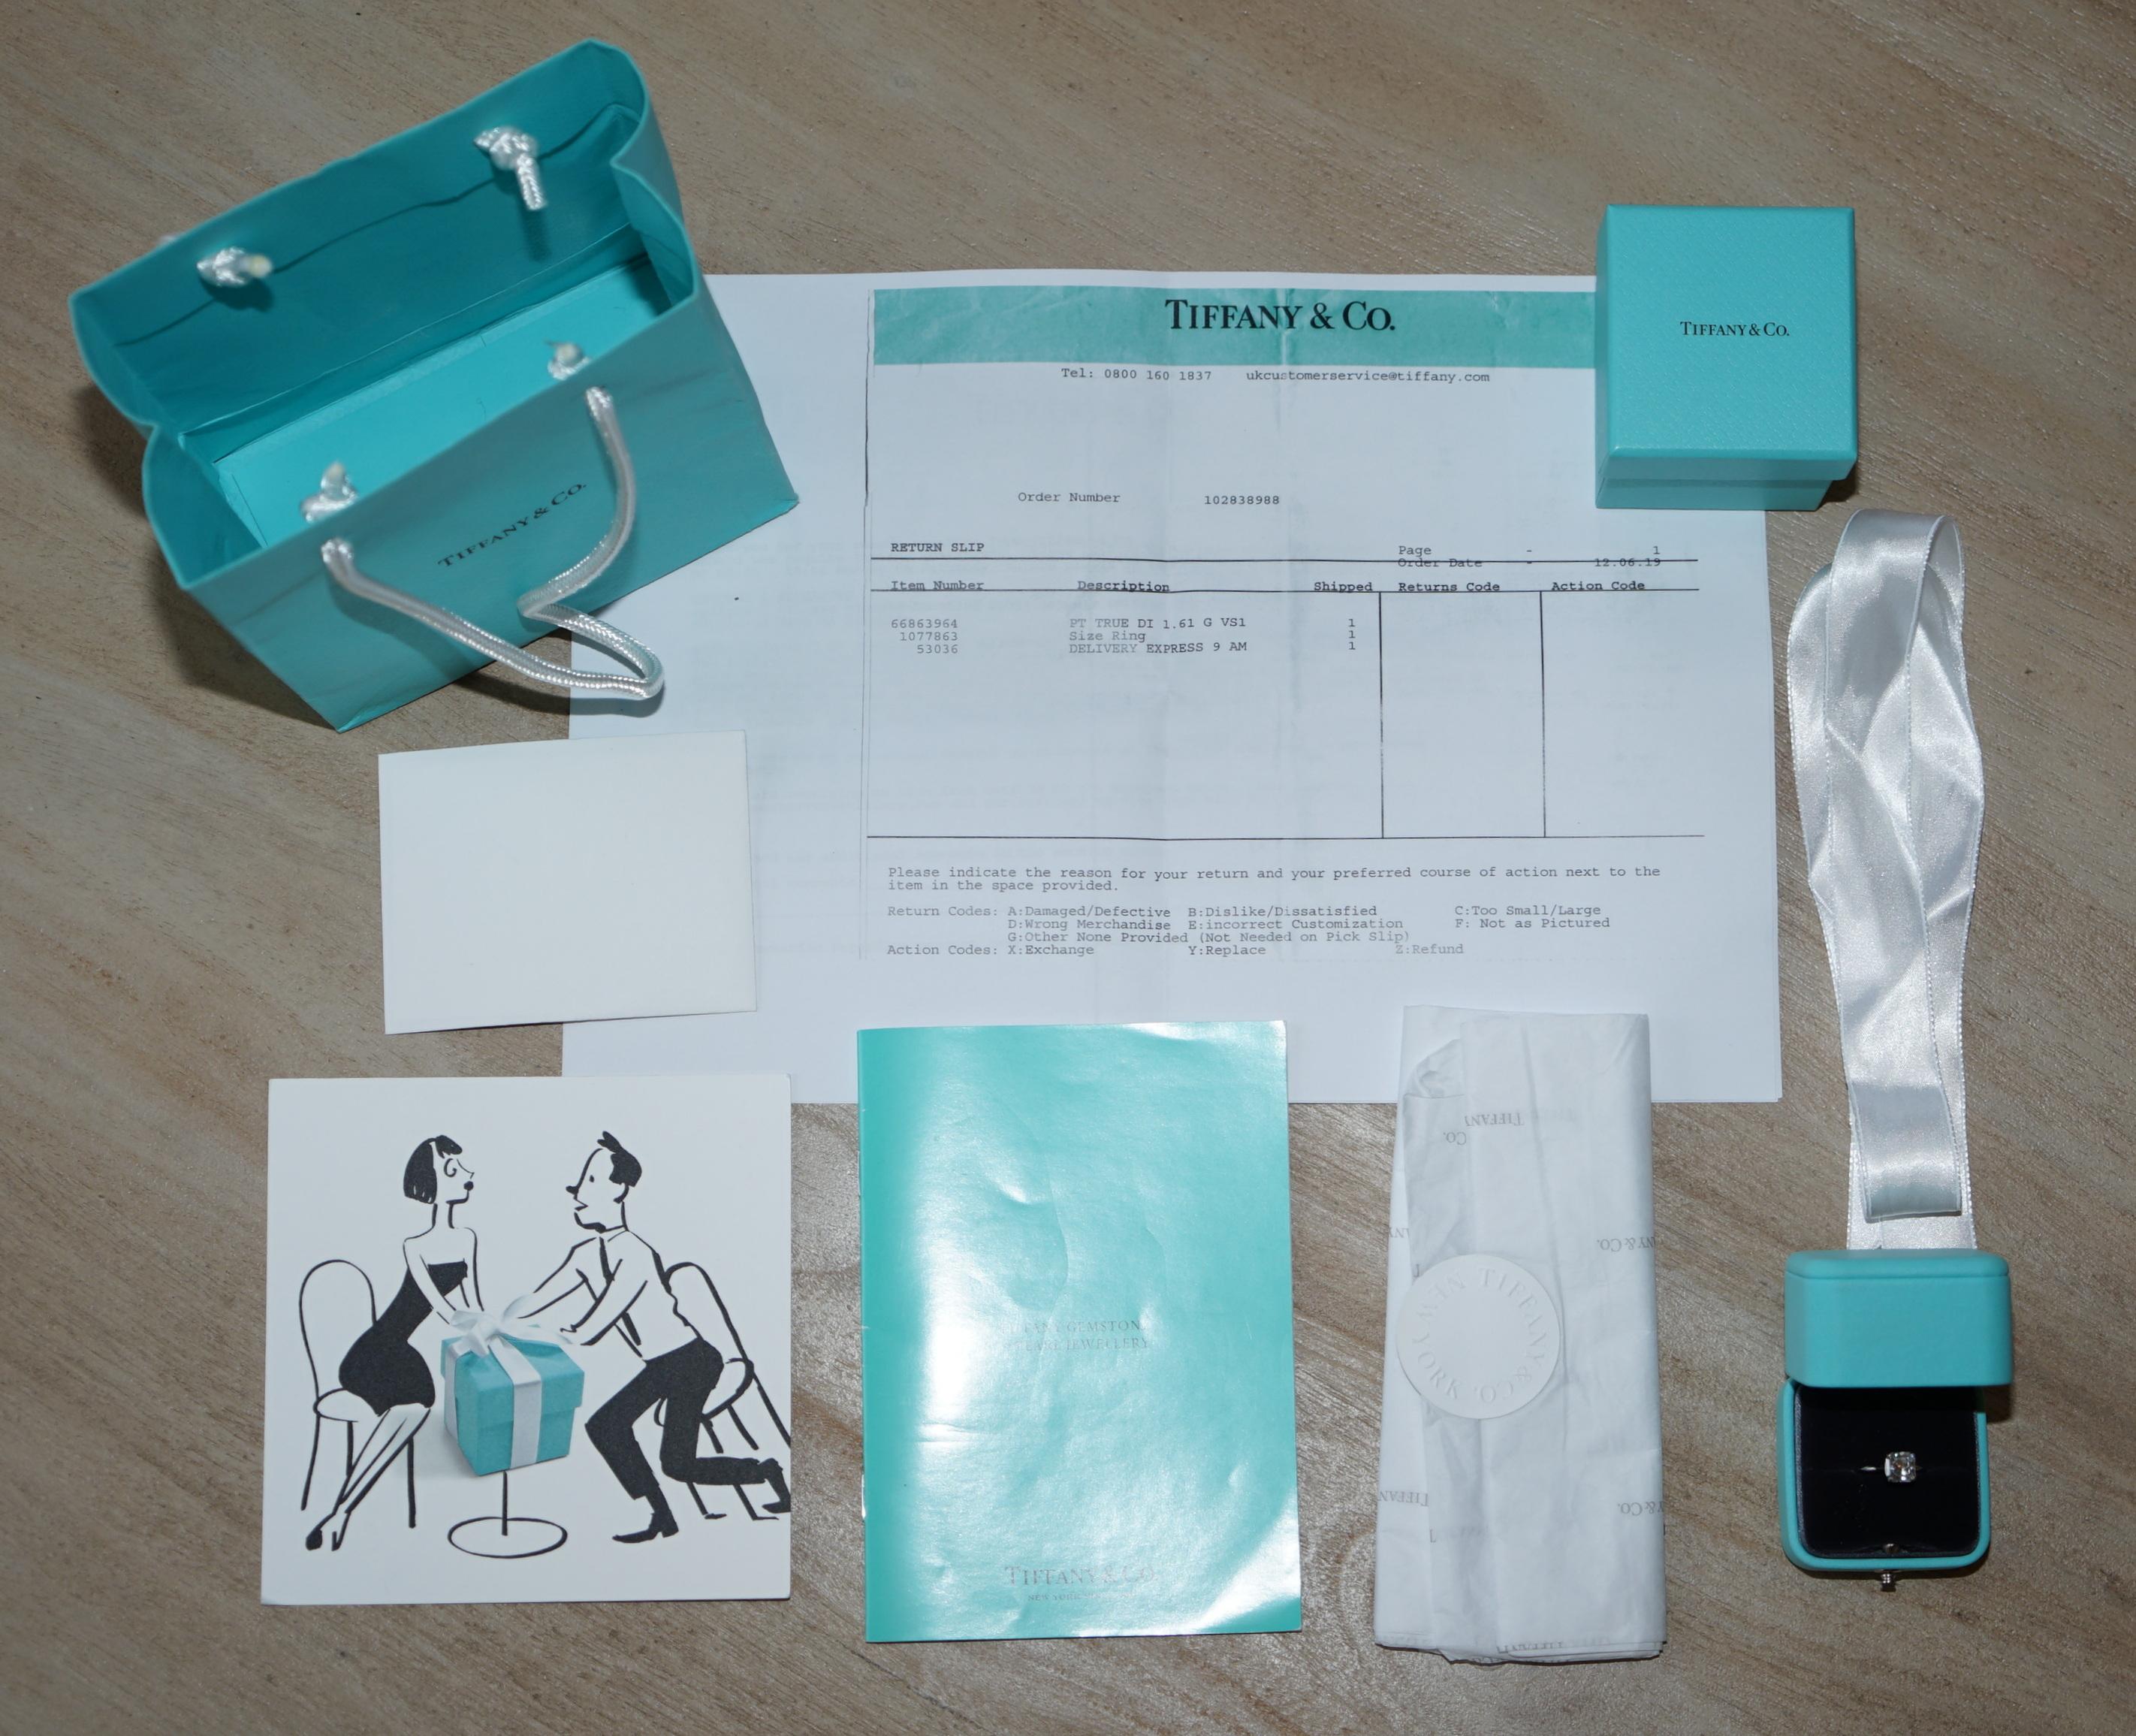 Mixed Cut Tiffany & Co True Platinum & 1.61ct Diamond Engagement Ring Box & Papers